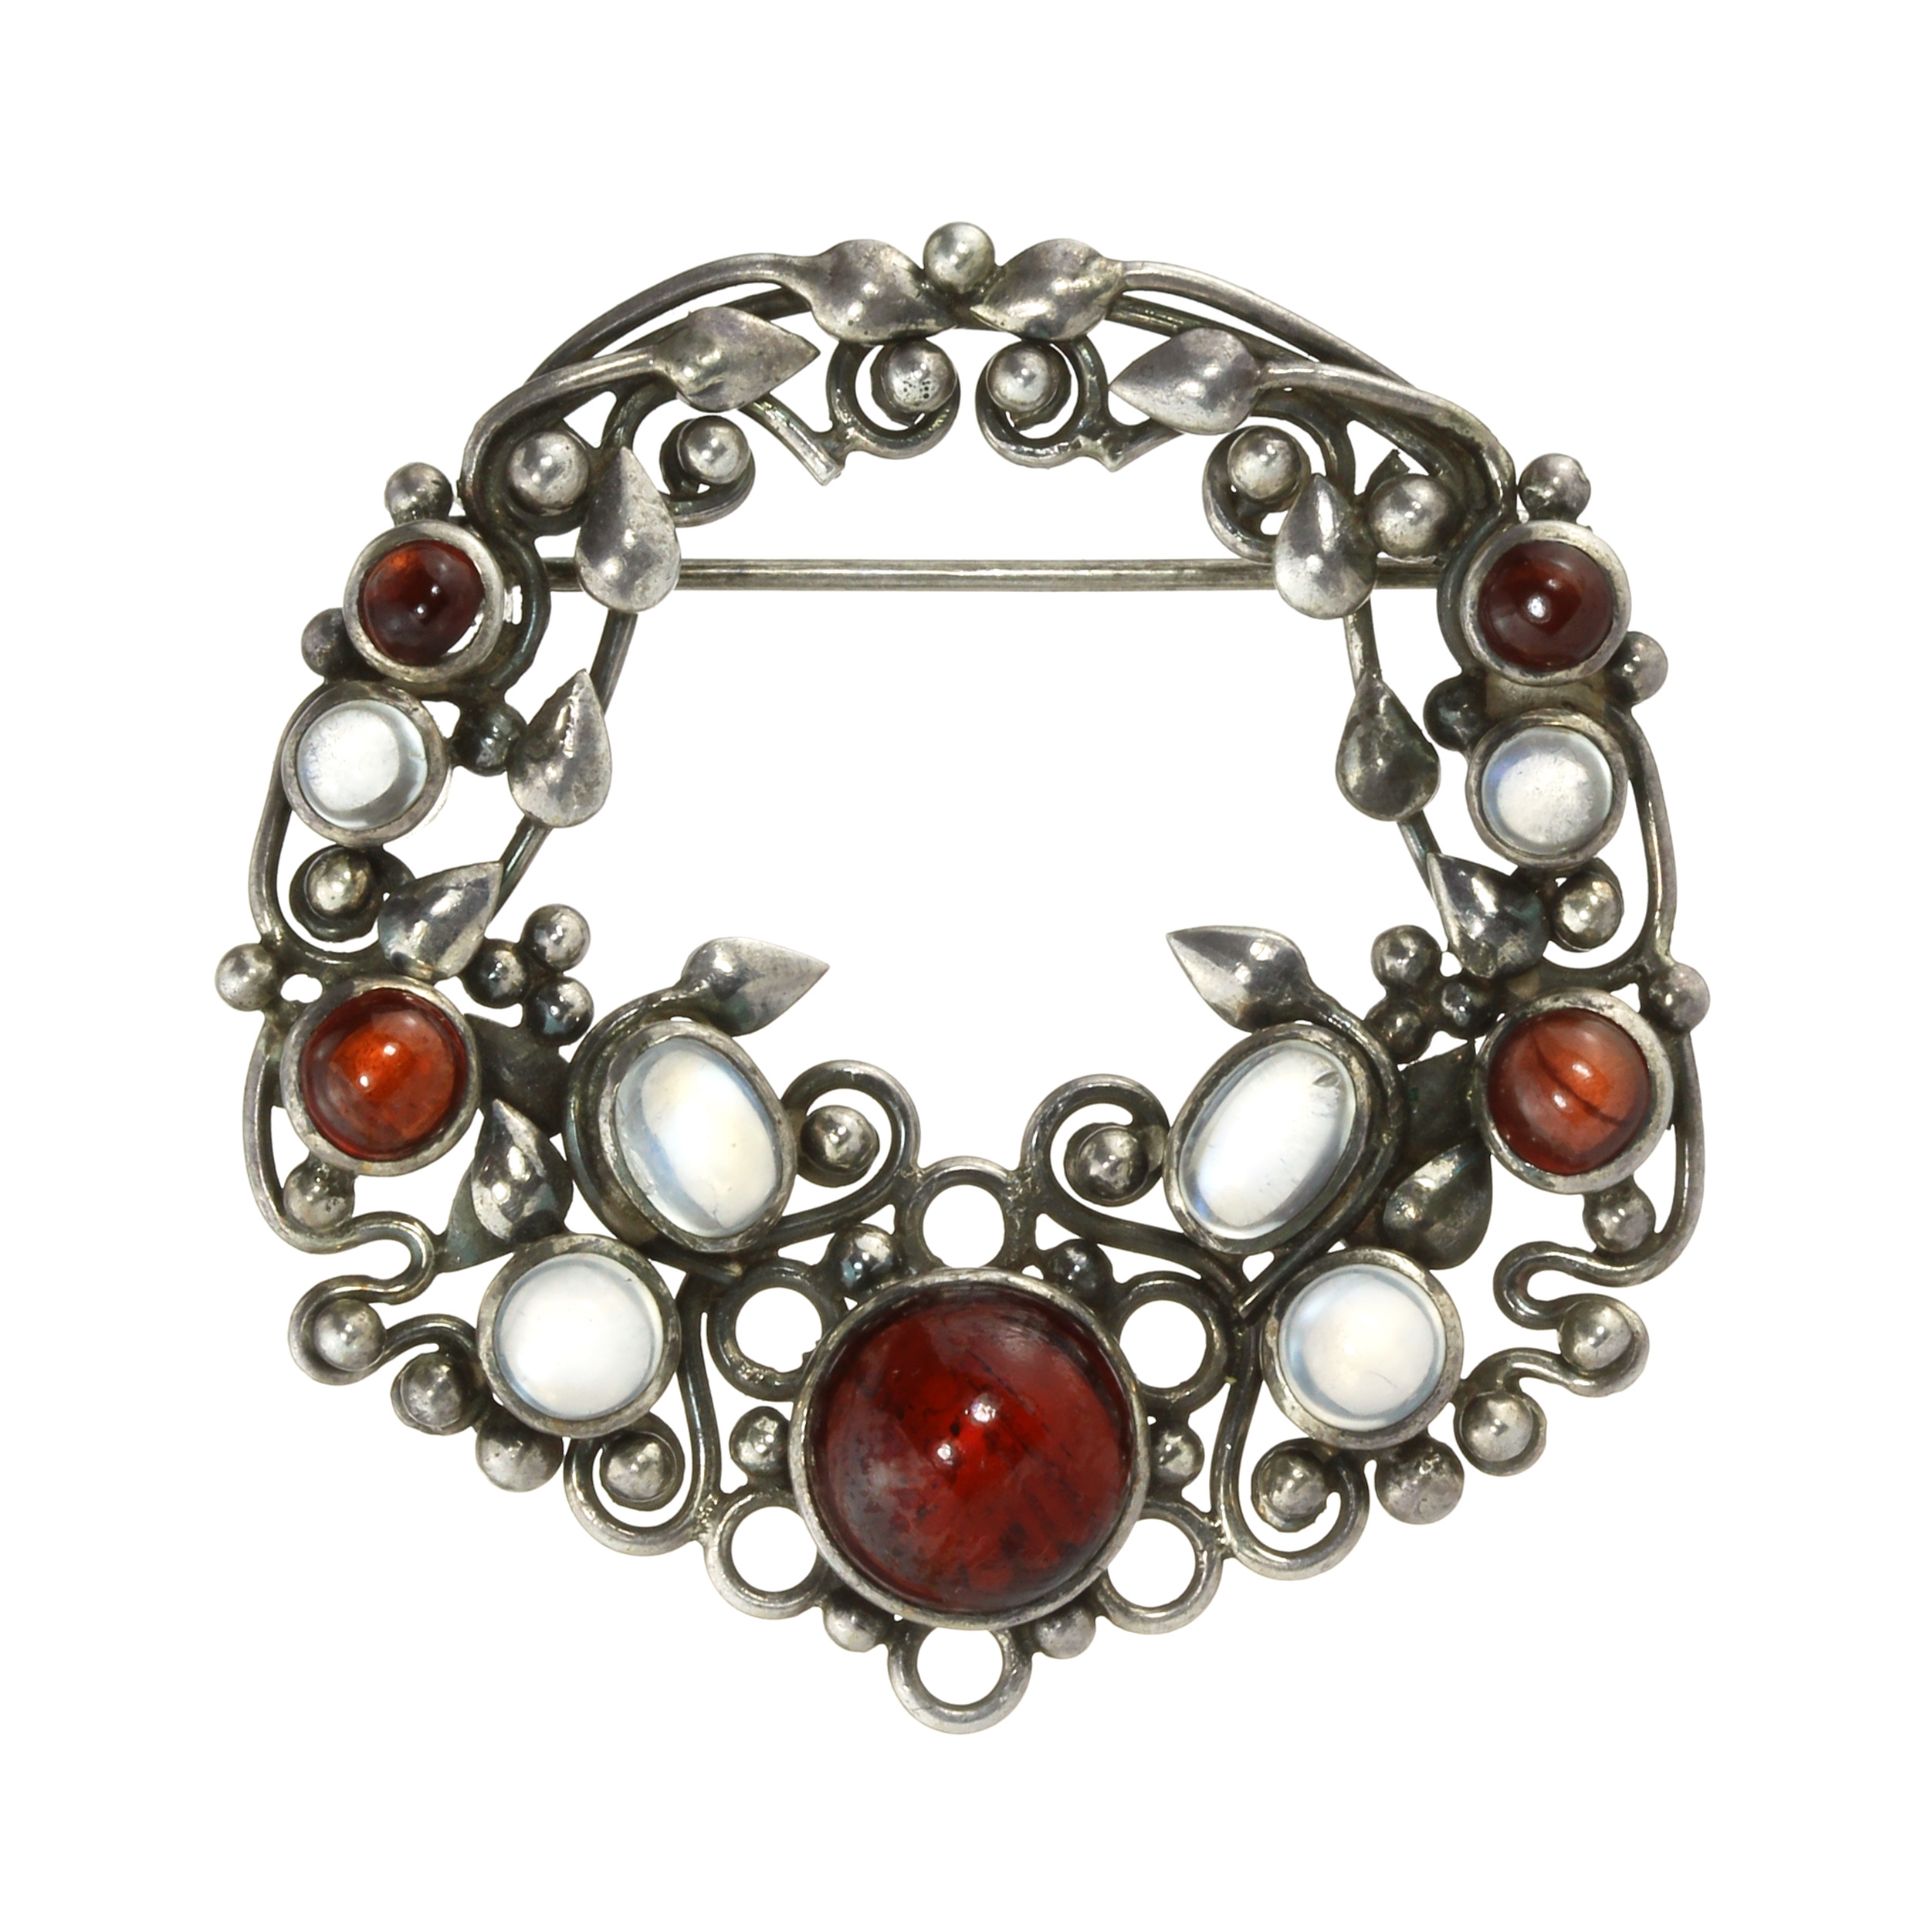 AN ANTIQUE ARTS & CRAFTS MOONSTONE AND GARNET BROOCH, ATTRIBUTED TO DORRIE NOSSITER in silver set